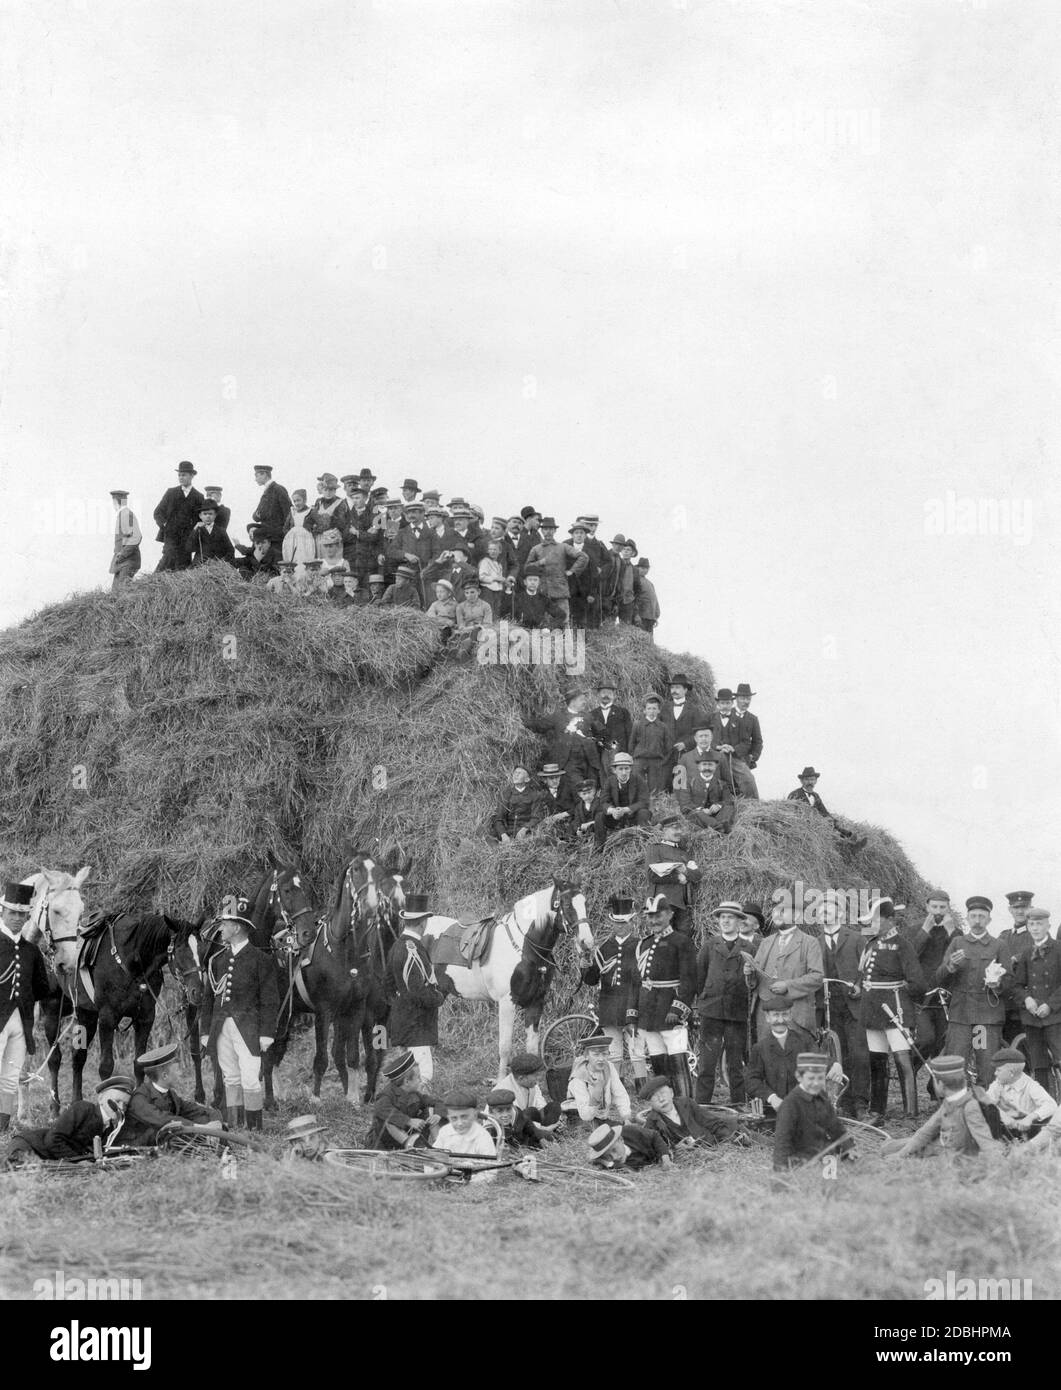 For the inhabitants of the manoeuvring area, especially the rural nobility, landowners and large farmers, the autumn manoeuvres, once the harvest had been brought in, provided a break from everyday life. The picture shows a group of away supporters during the 1904 imperial maneuvers around a large heap of straw. In the front, servants in livery hold the ladies' riding horses. Stock Photo